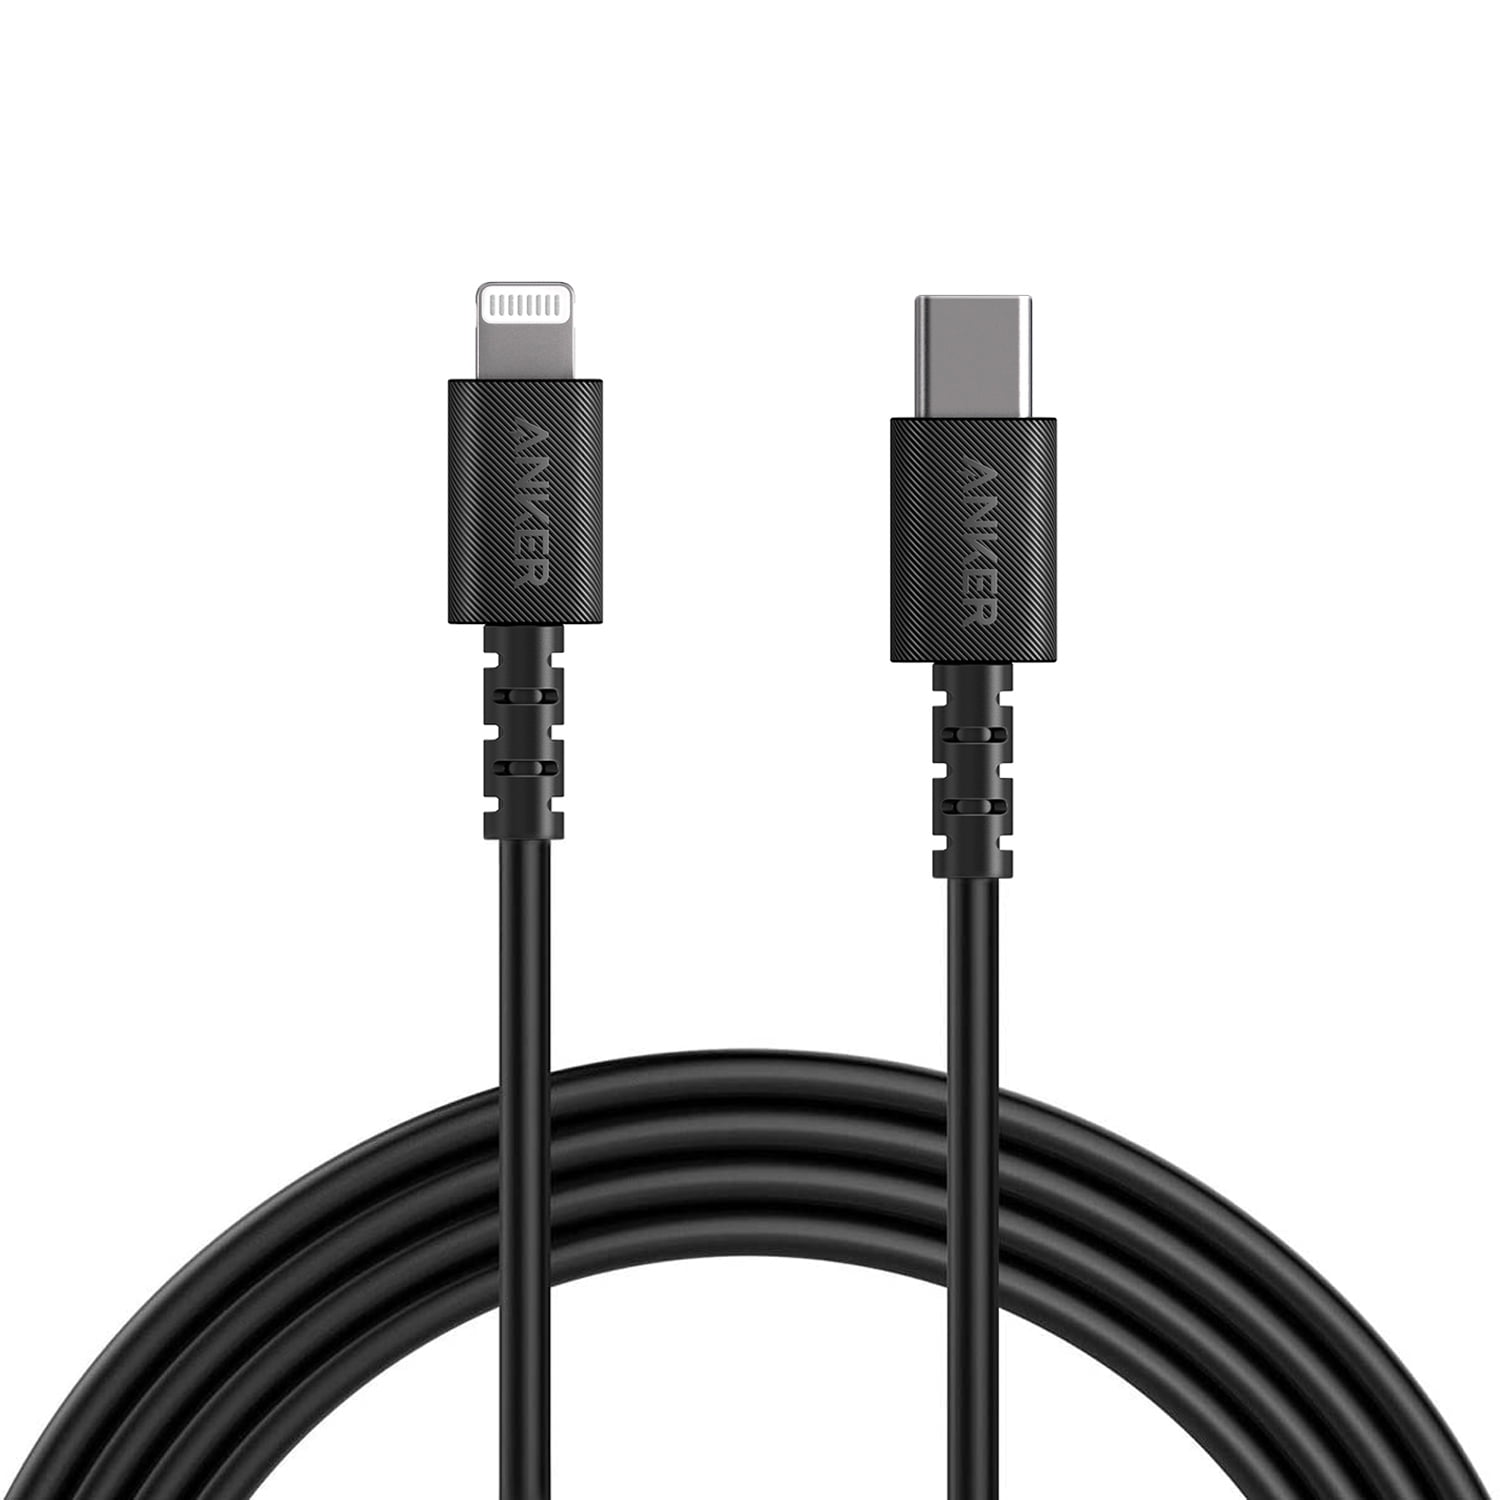 Anker PowerLine Select + USB-C Cable with Lightning Connector 6ft, Apple MFi Certified - Black